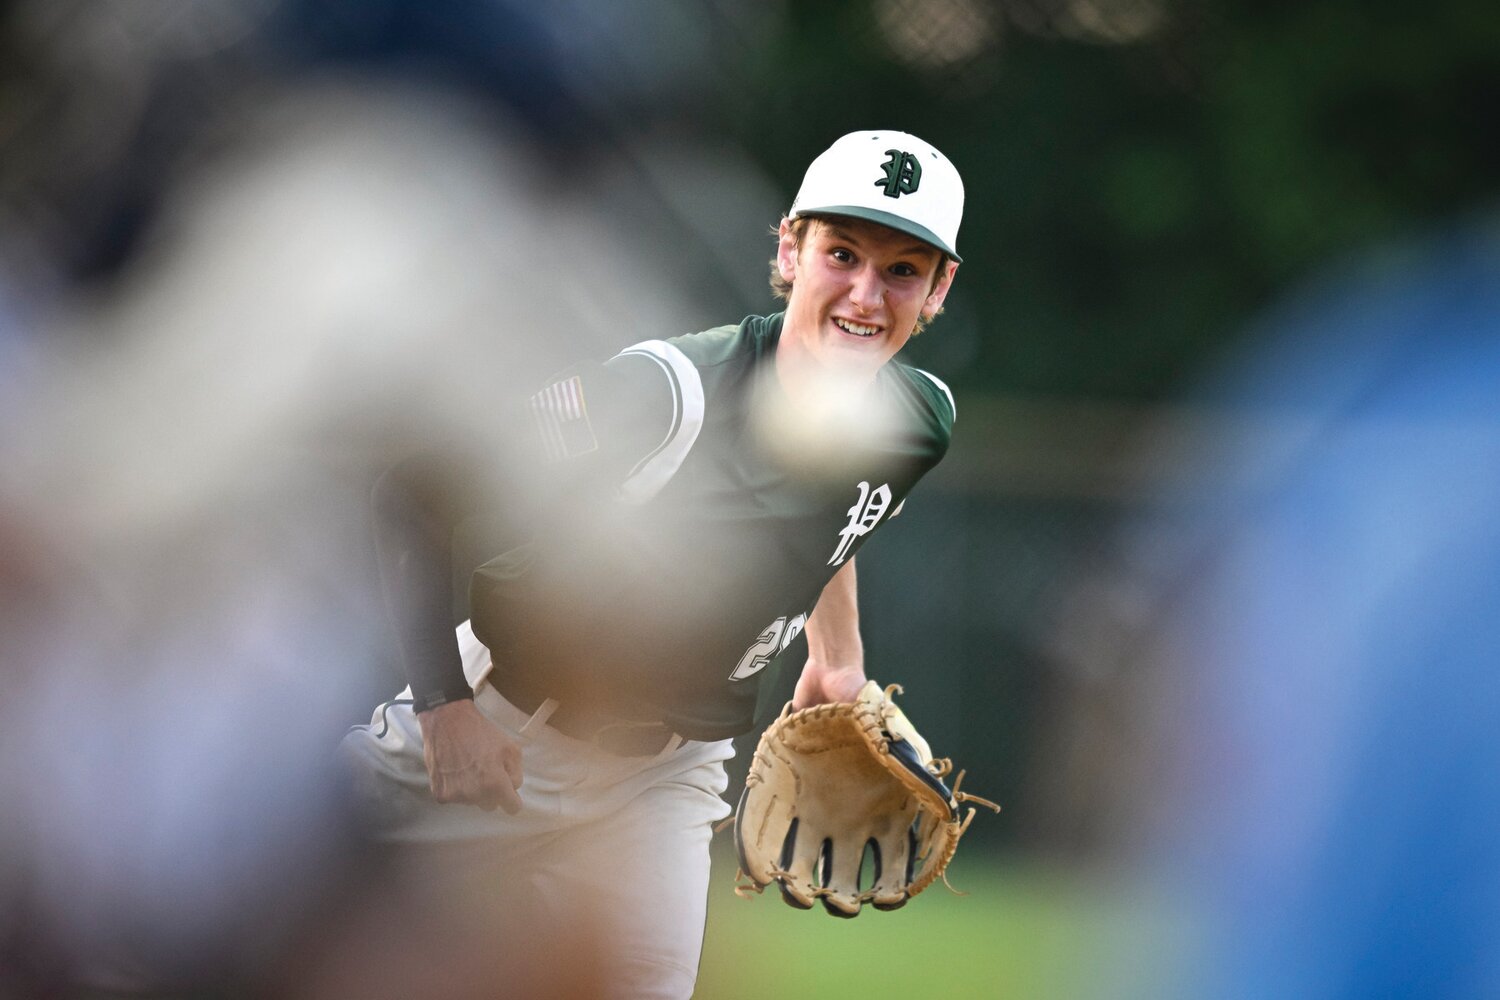 Pennridge pitcher Owen Gruver delivers a pitch in the fourth inning. Gruver pitched a complete, five-inning mercy rule game, striking out five and no walks.